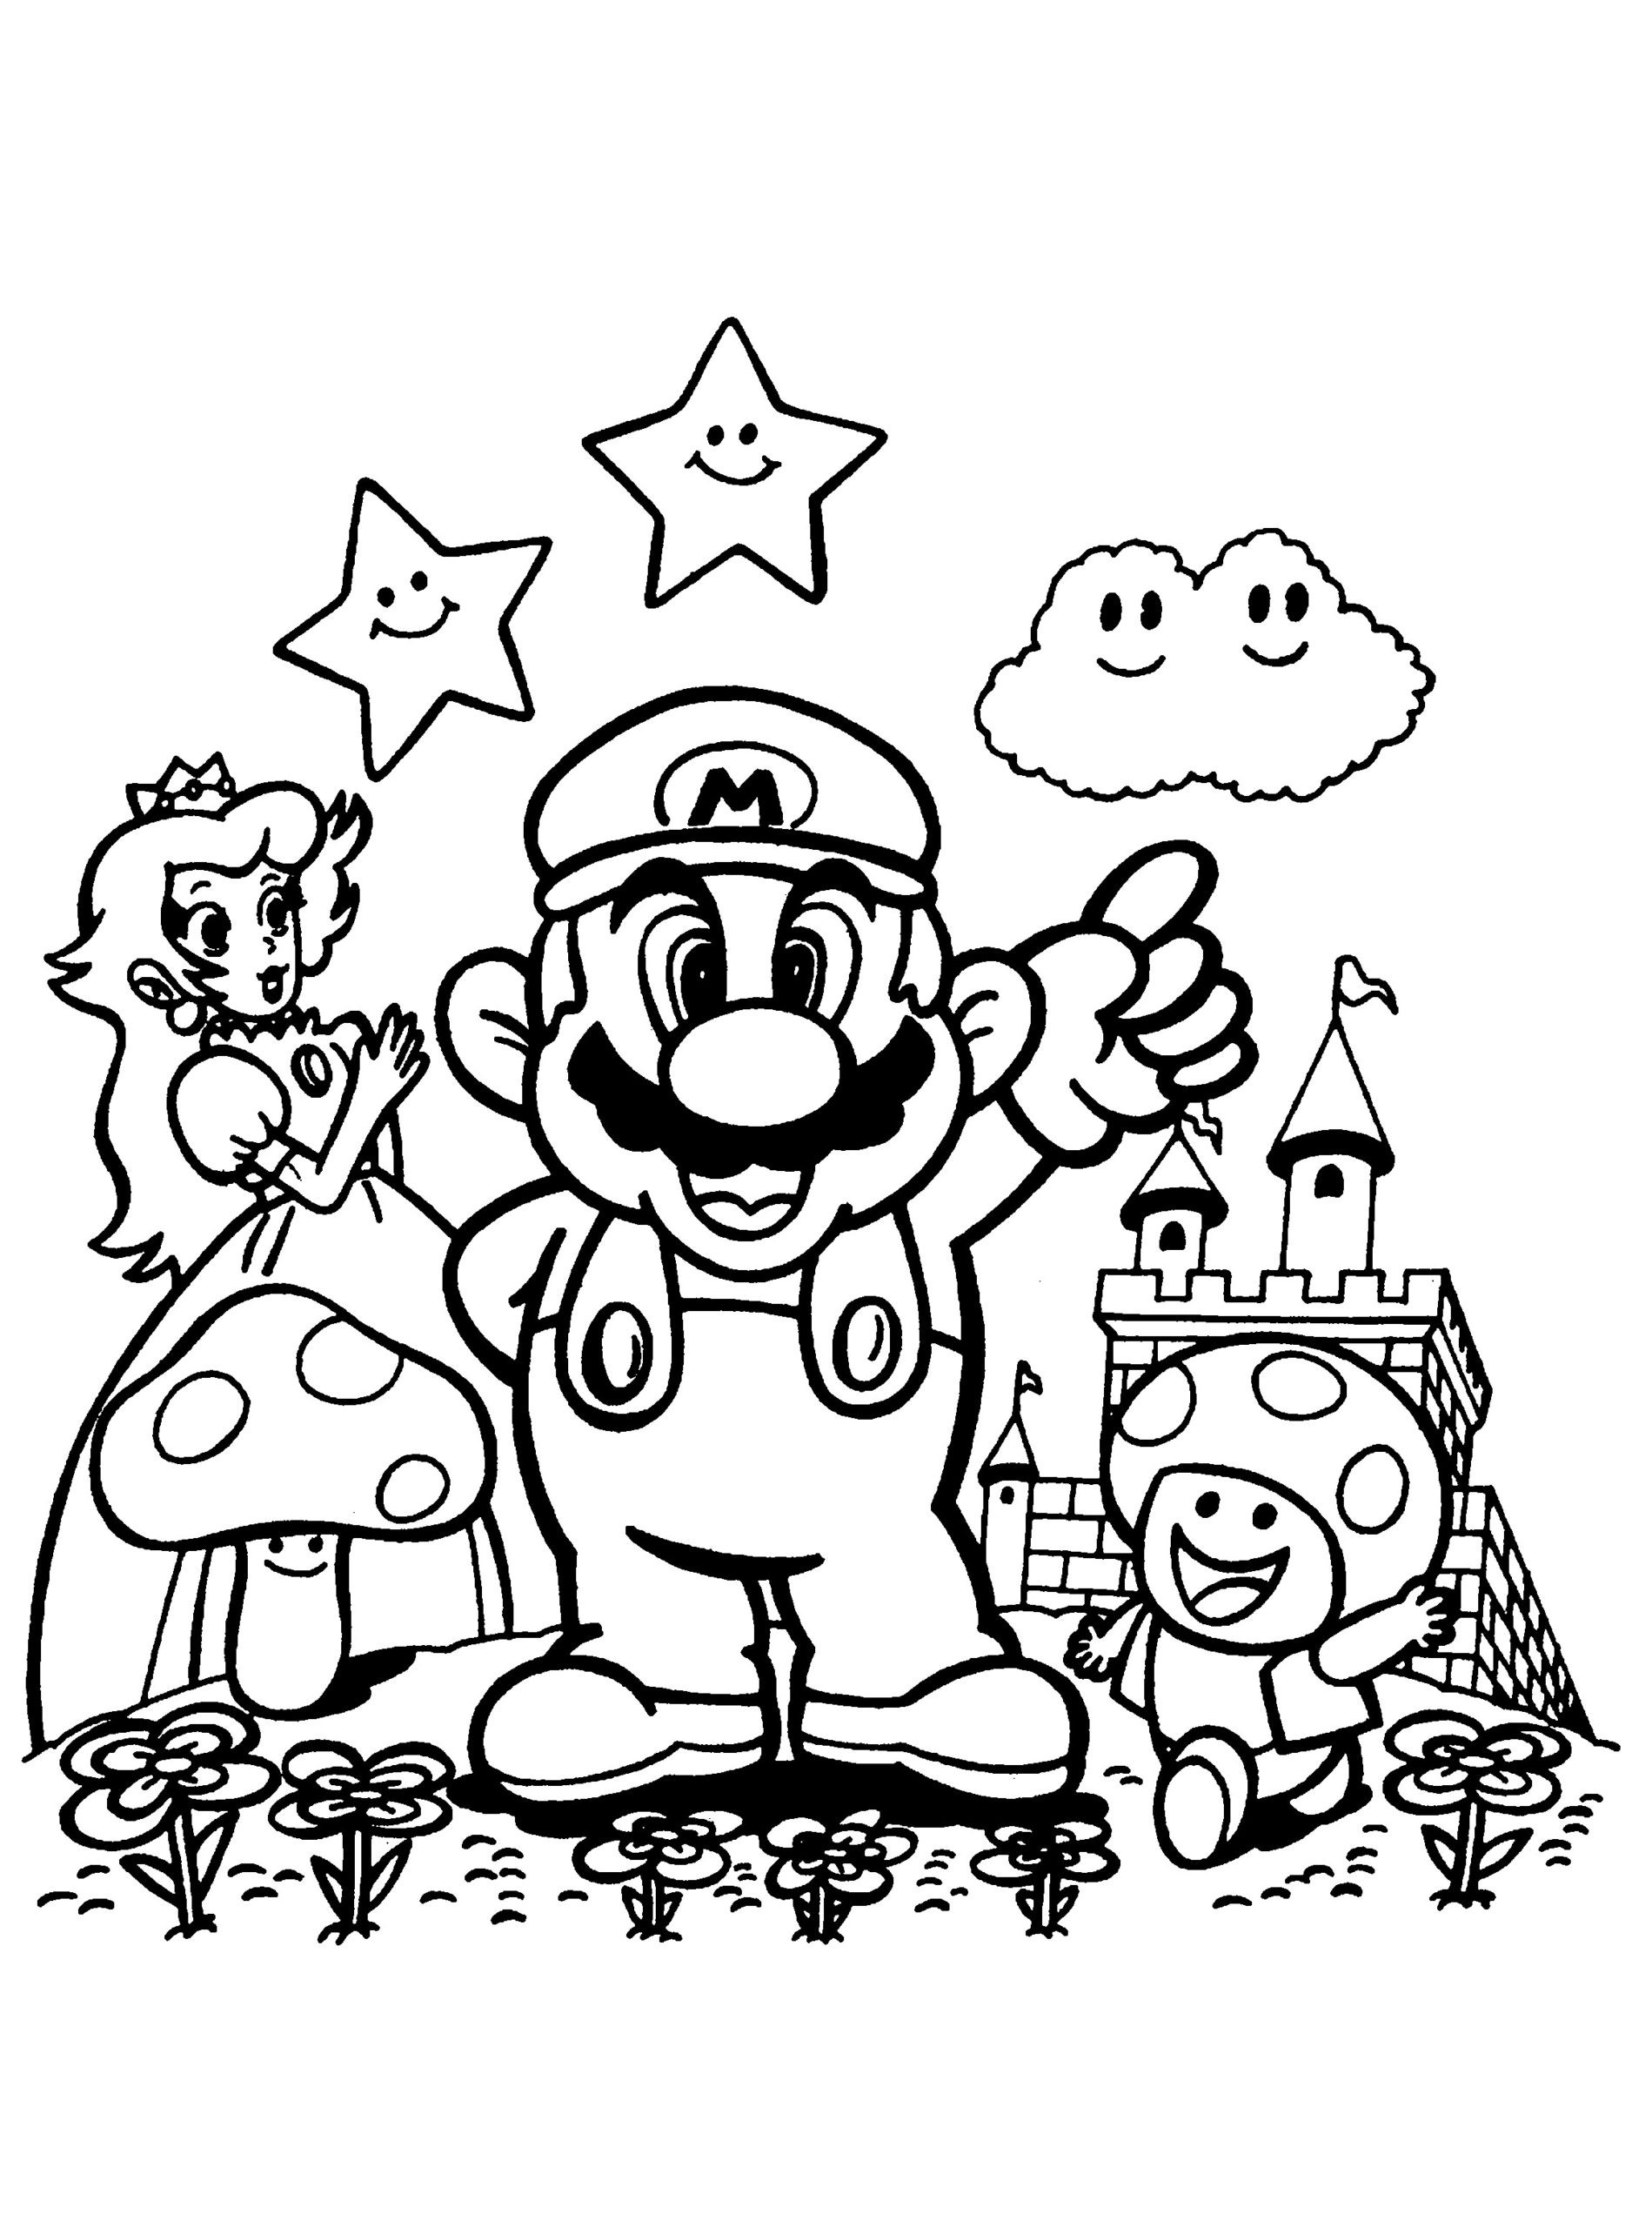 Super Mario Images To Print Coloring Pages Best Of Super Mario ...